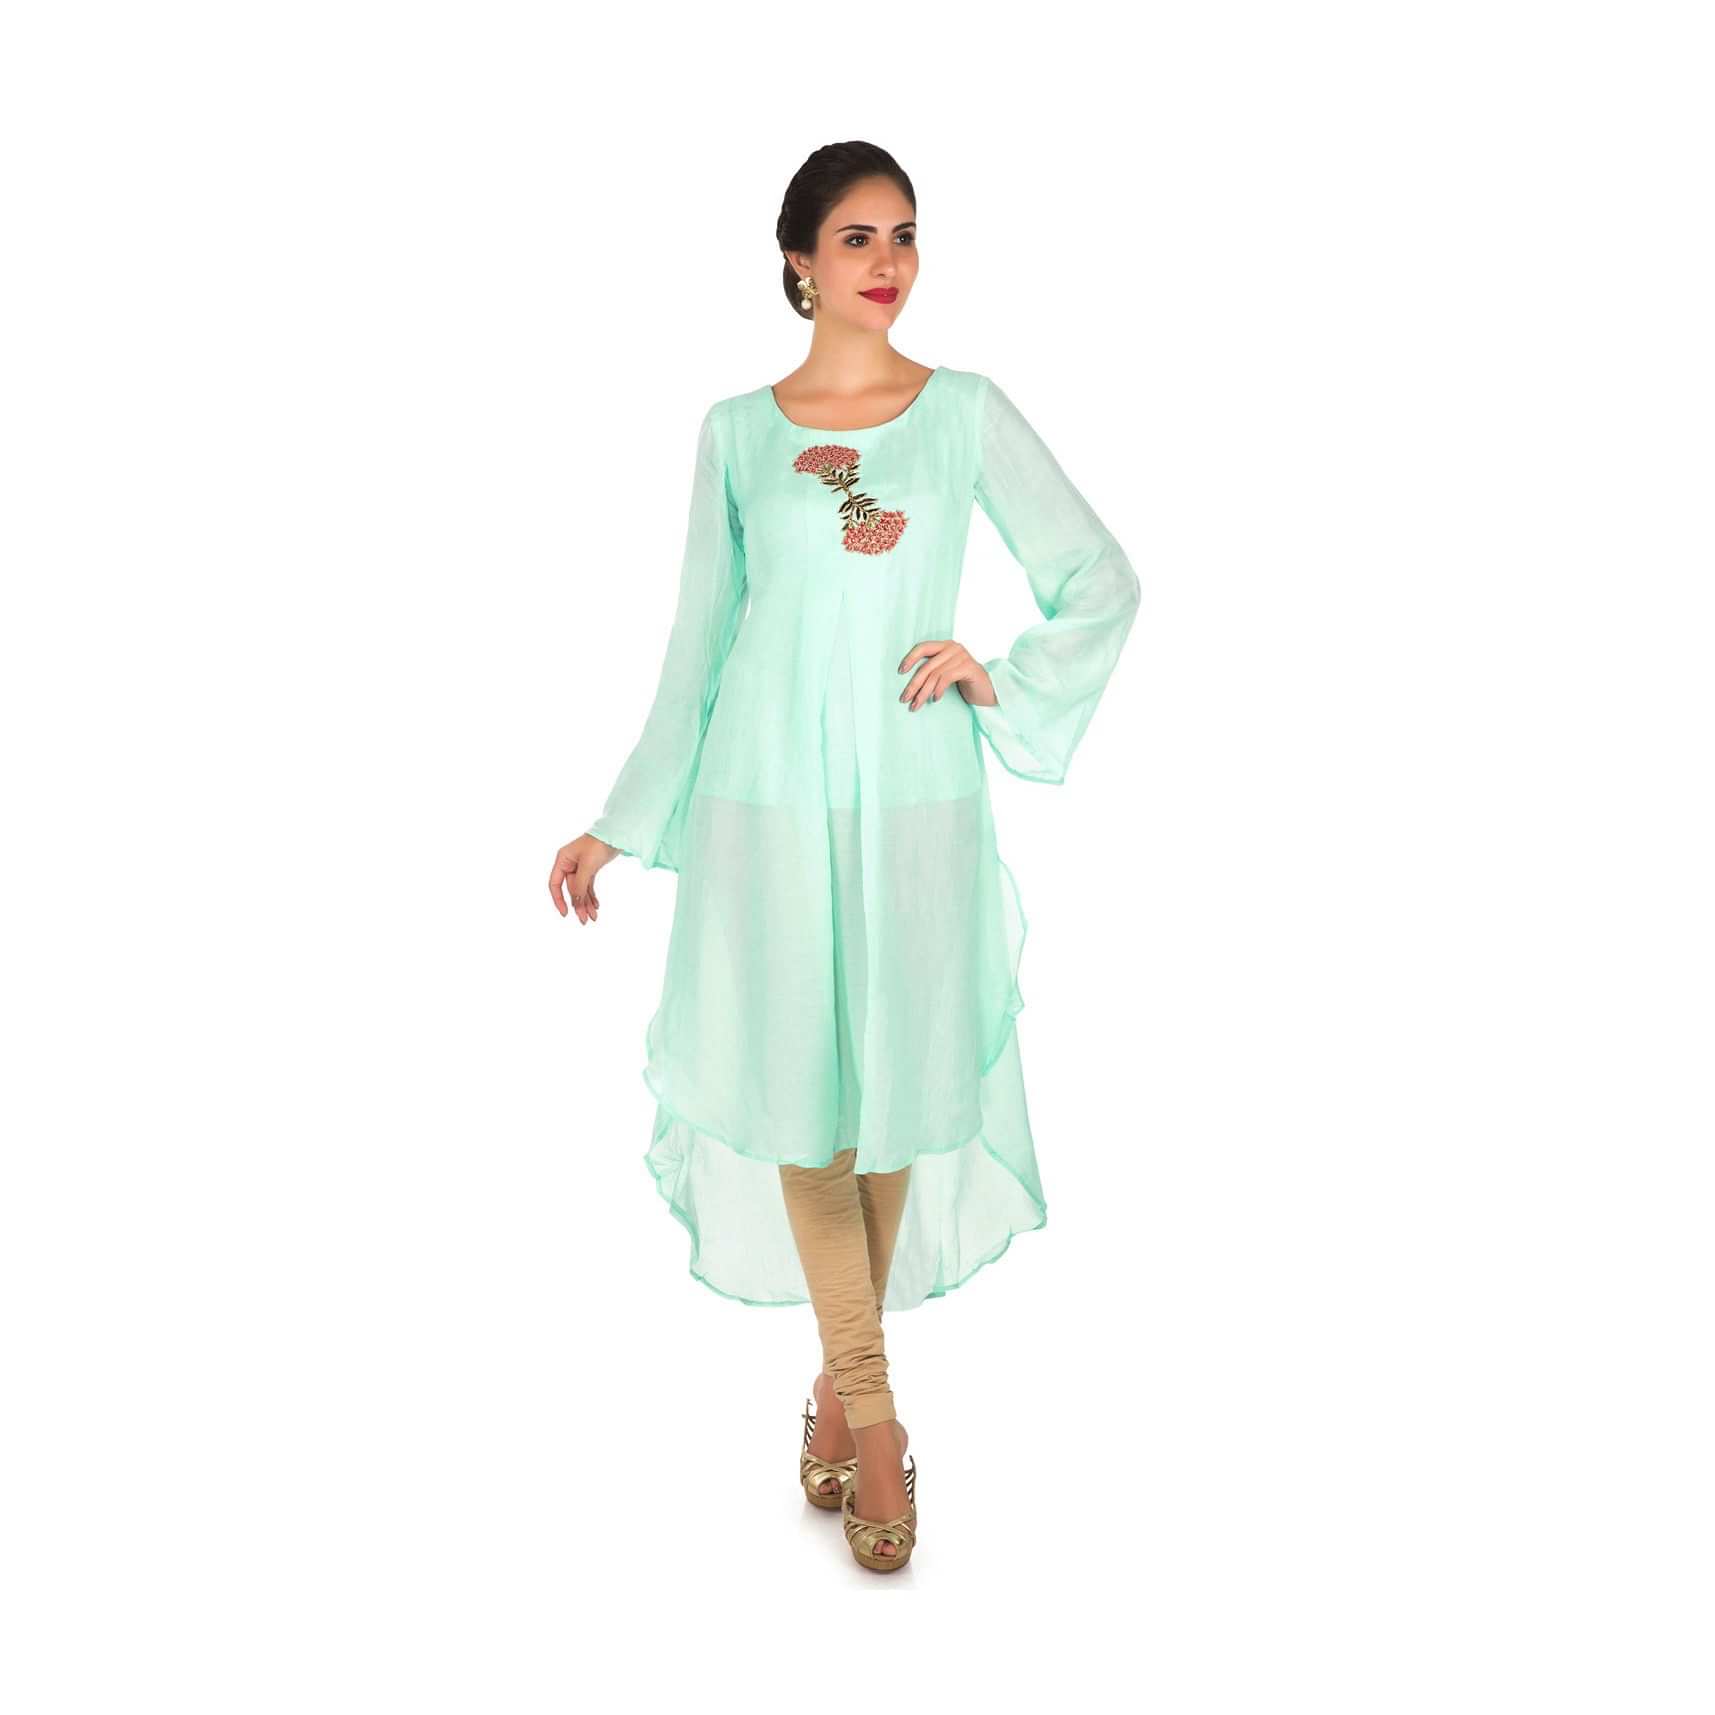 Mint green kurti in cotton adorn in french knot floral motif embroidery only on Kalki